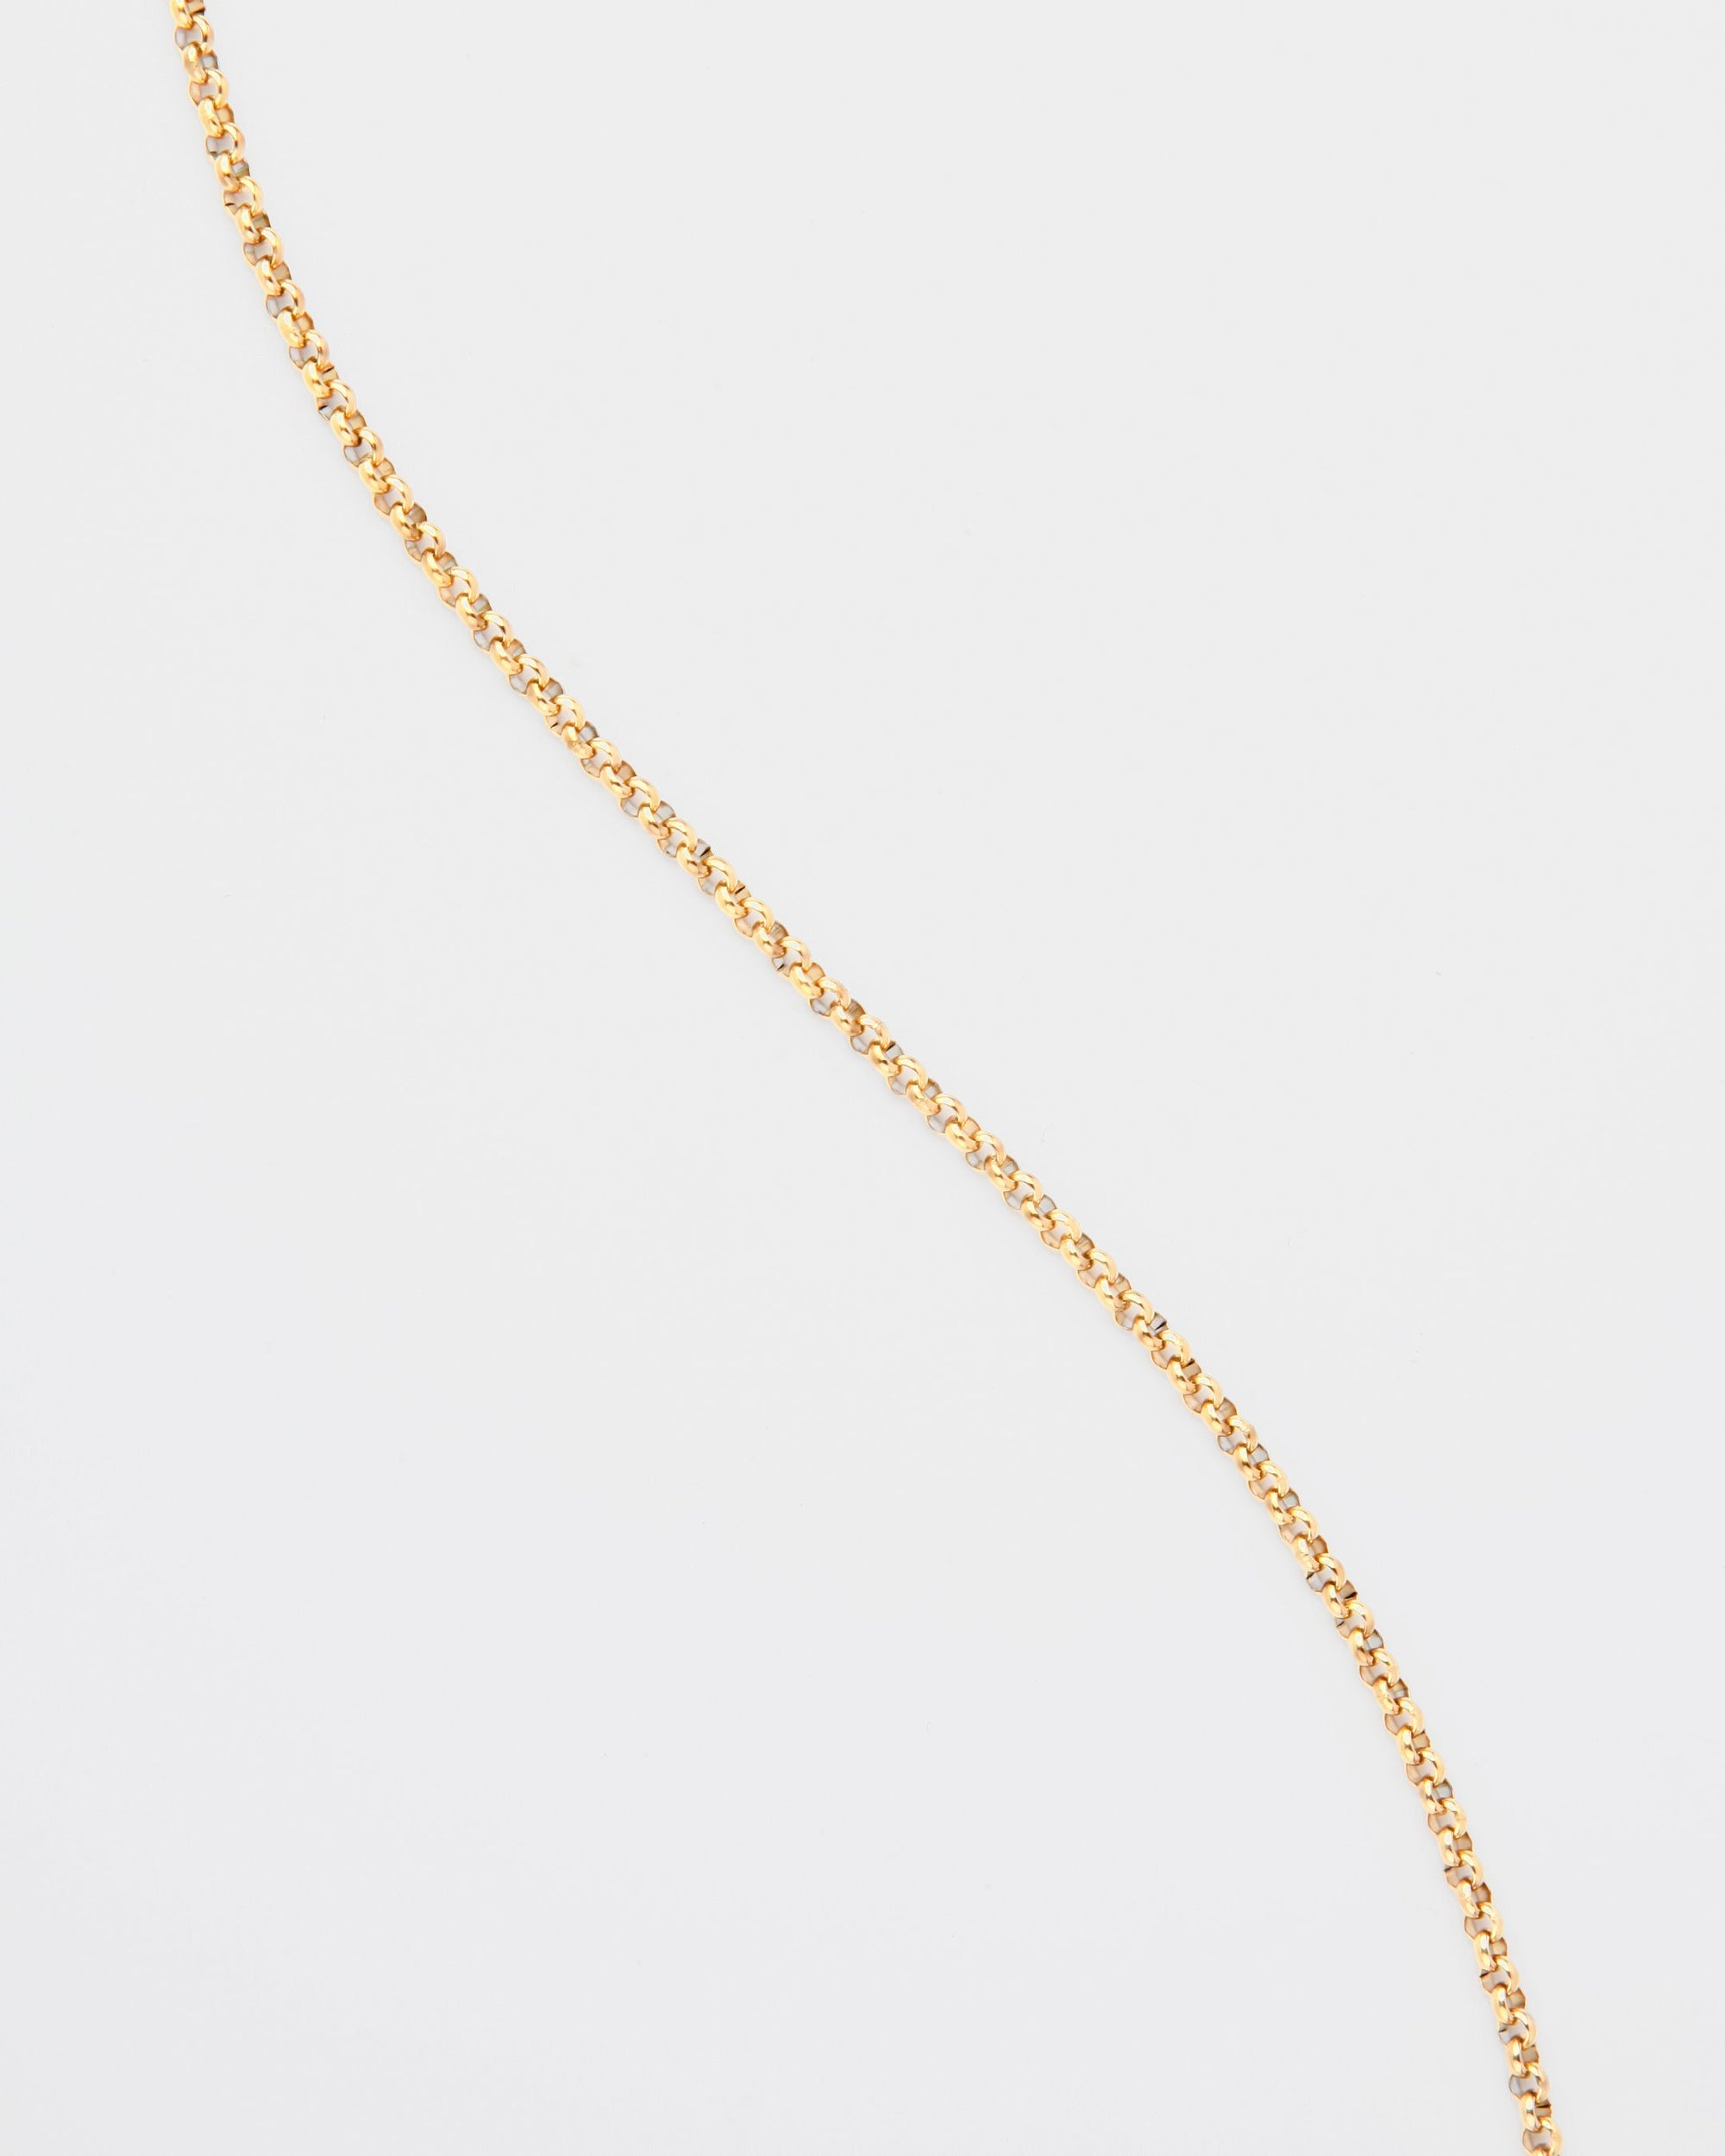 A thin, 18K gold-plated chain with small, round links is draped diagonally across a plain white background. The Florentina Glasses Chain by For Art's Sake® is simple and elegant with a slight shine.